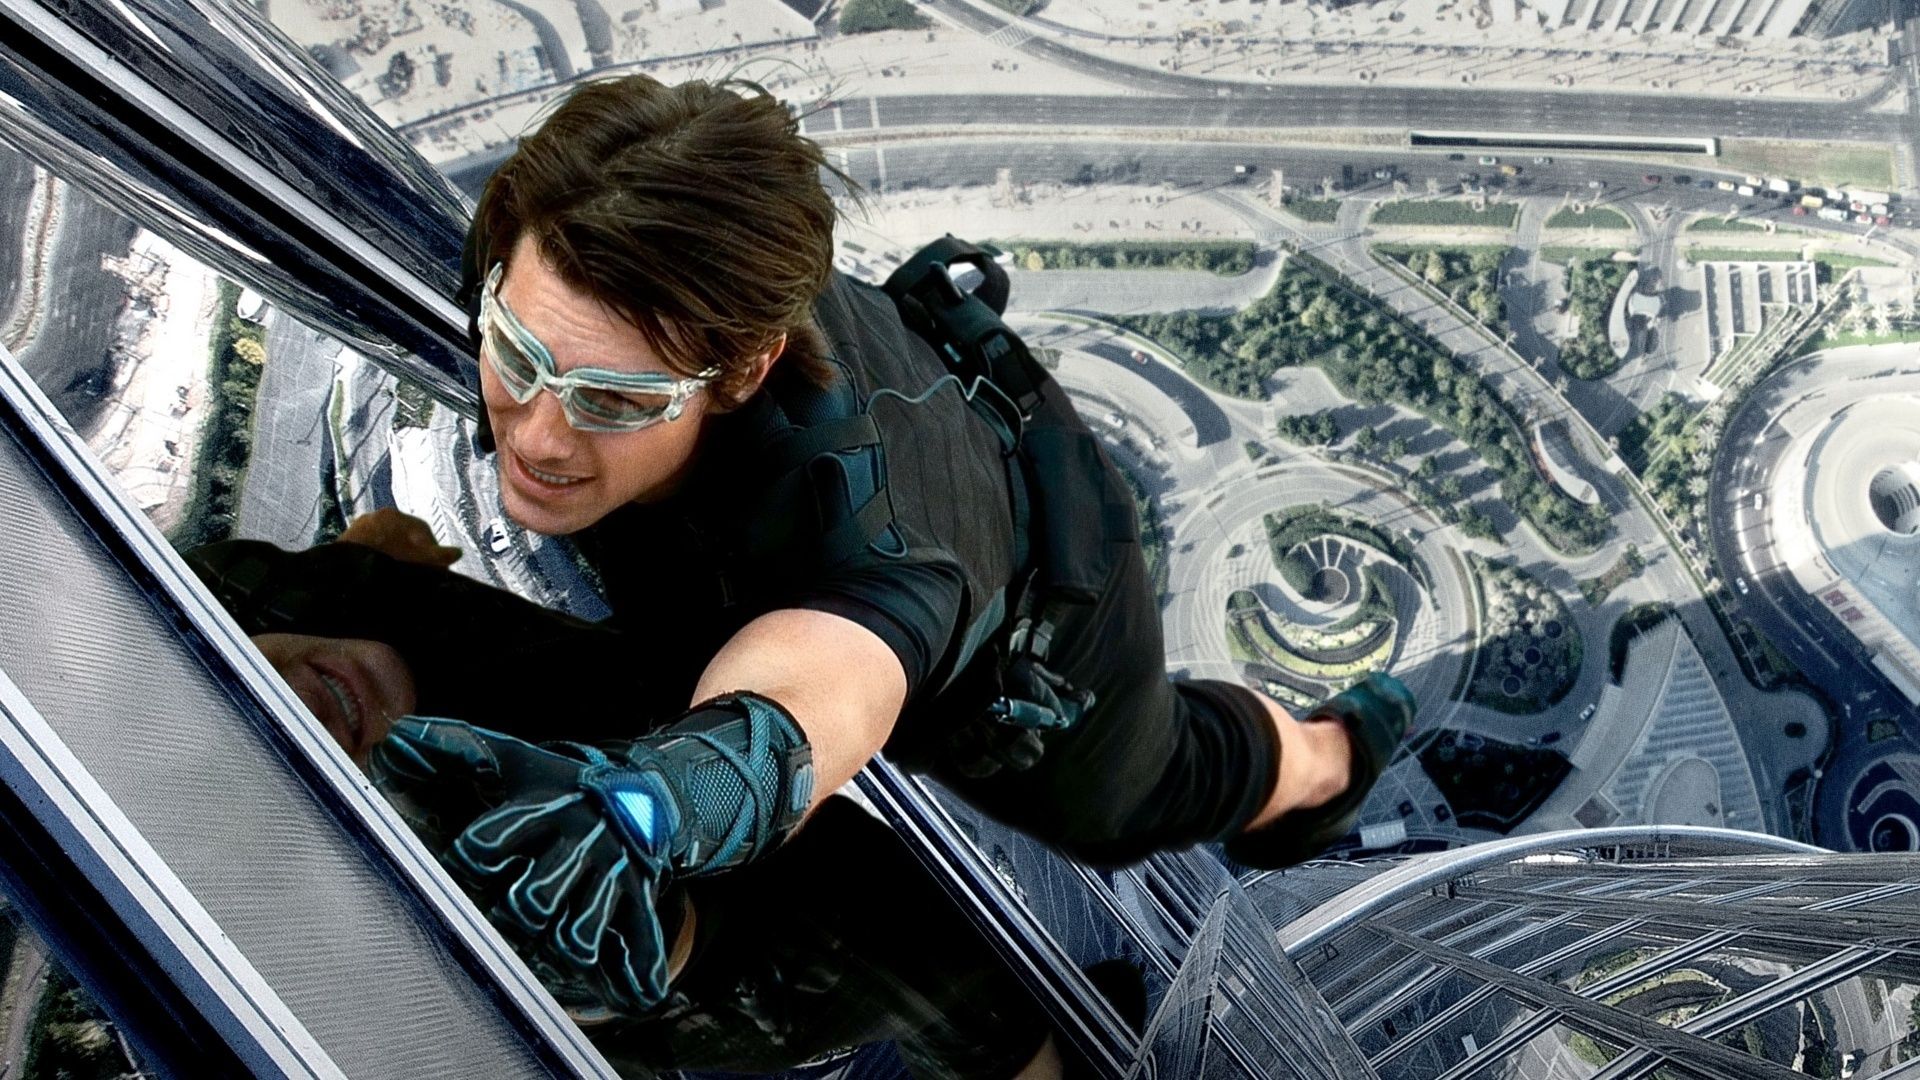 Mission Impossible Collection 4K Review